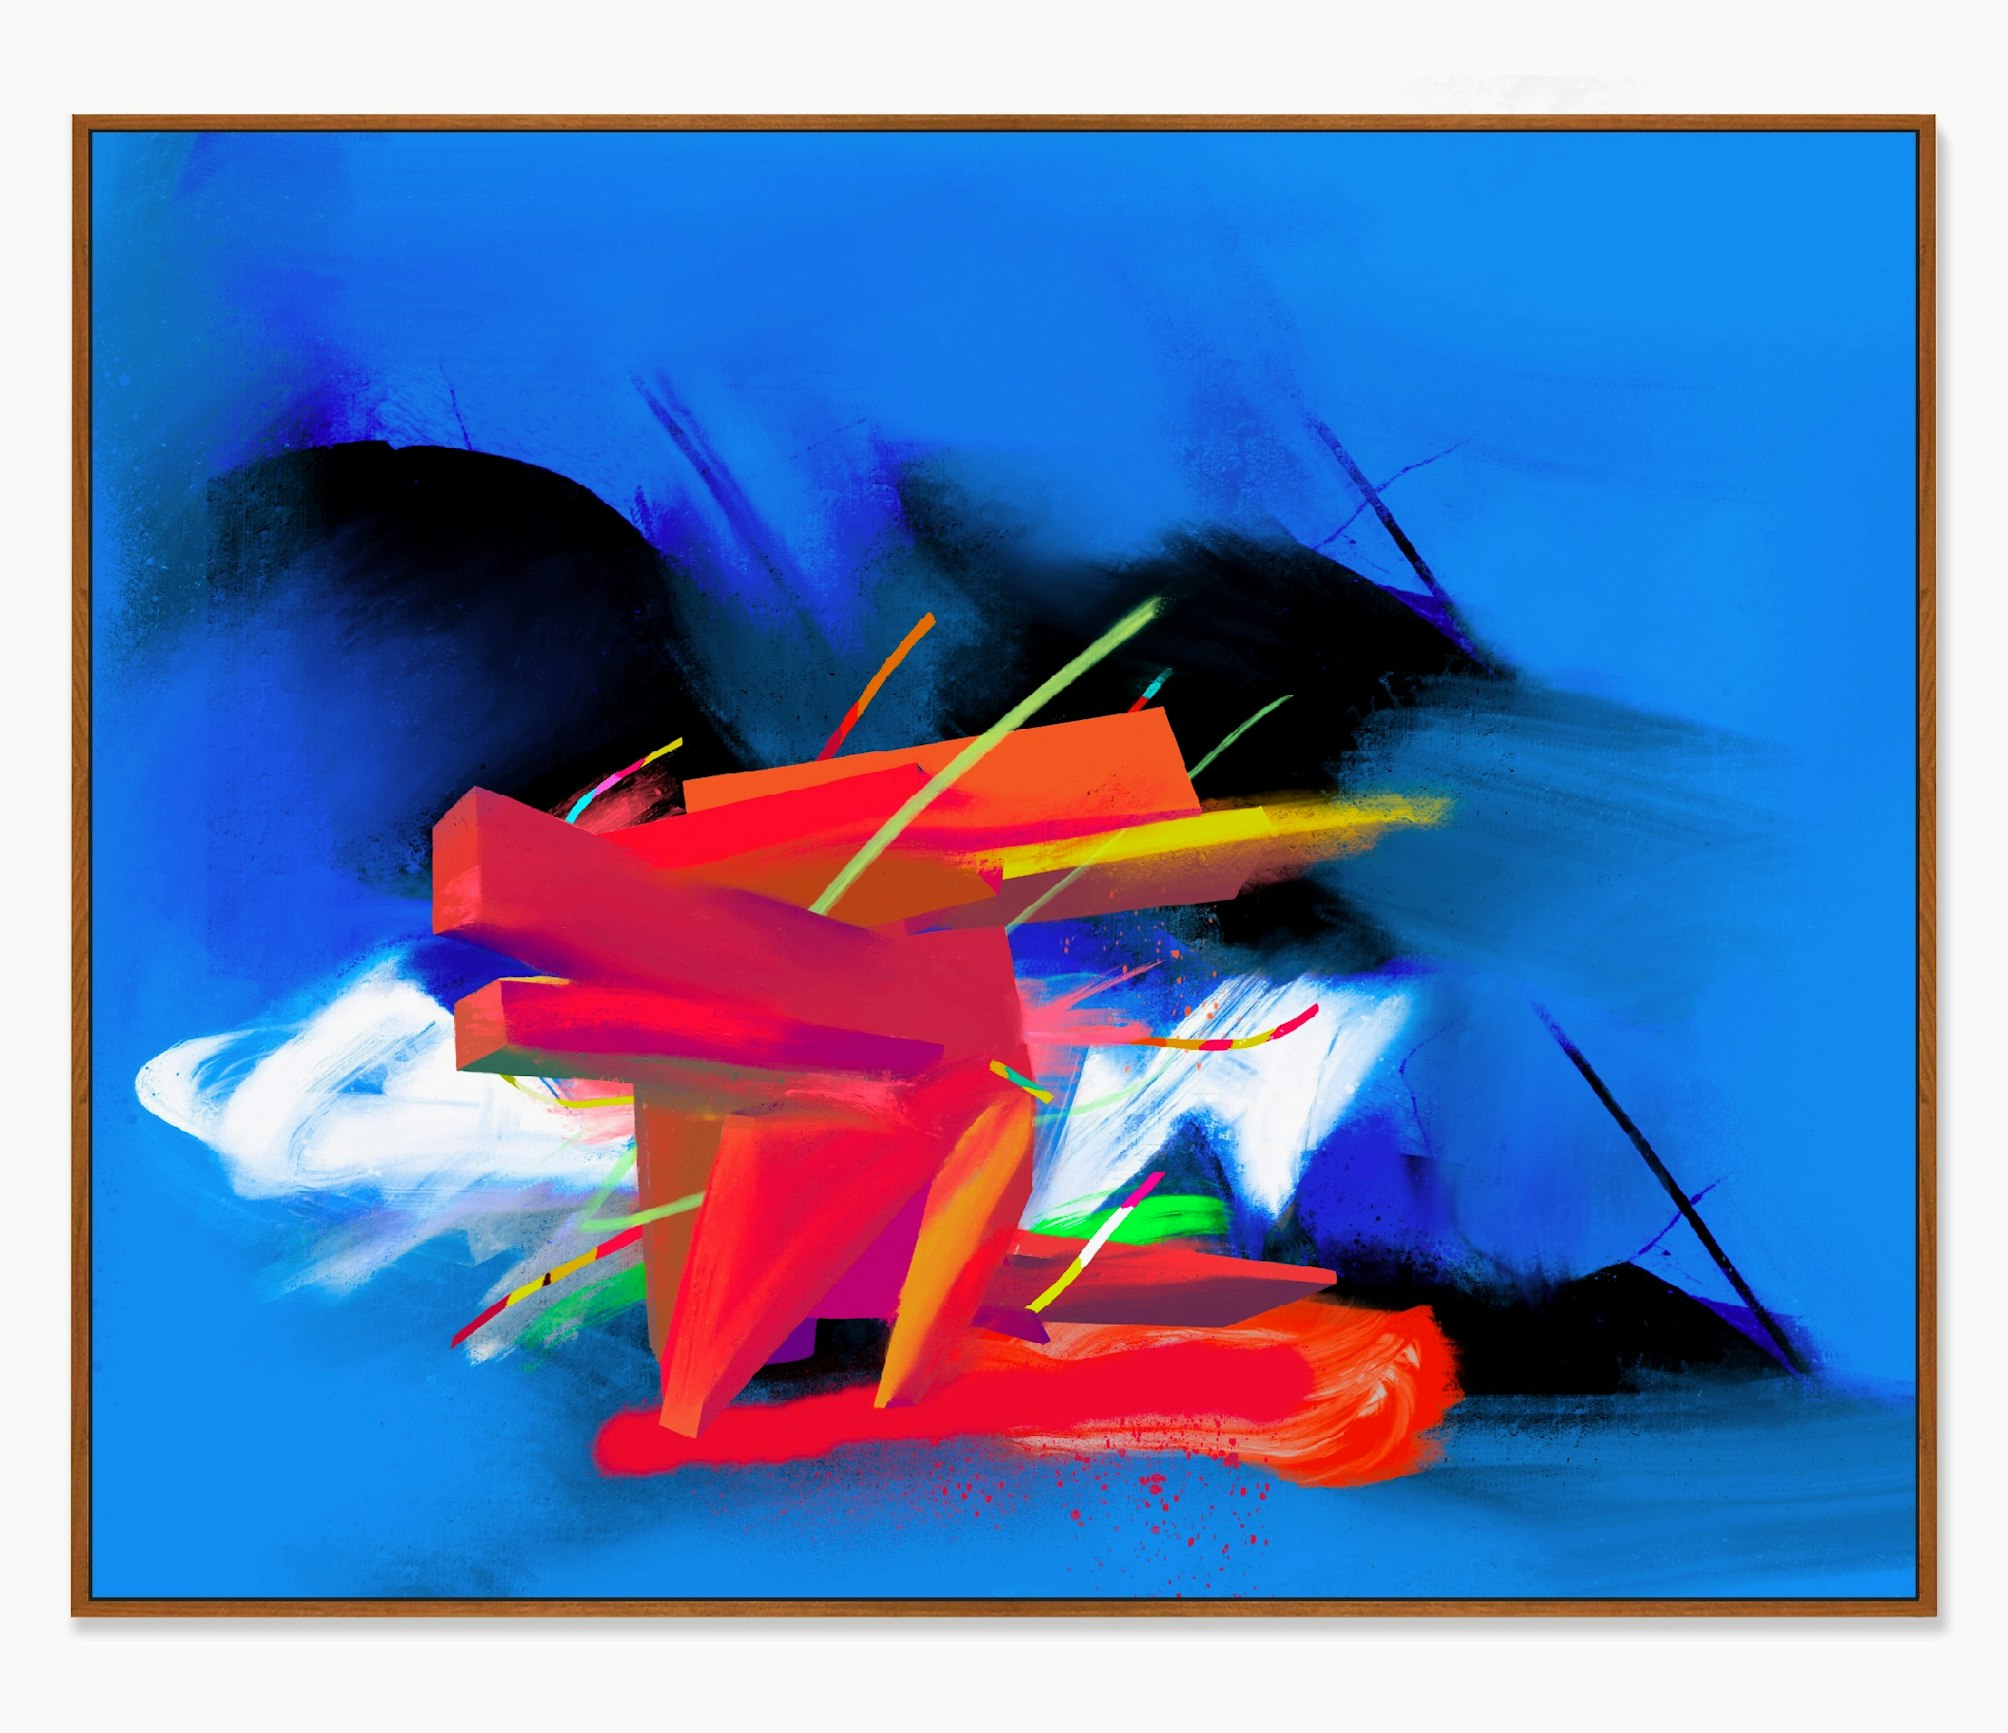 Red and Orange 3D abstraction with blue backgound